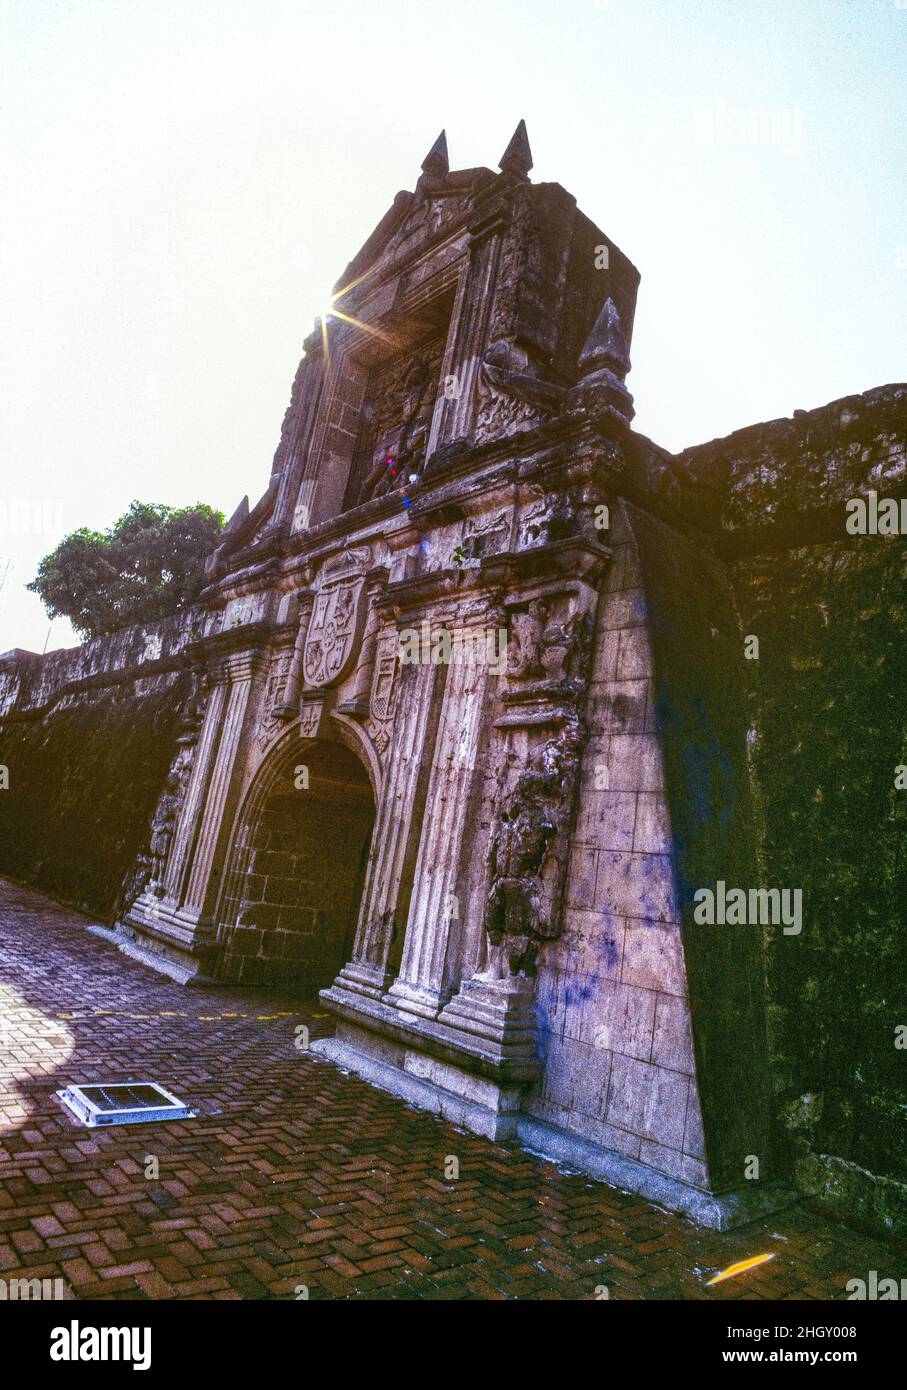 The main entry gate to Fort Santiago in Manila, the Philippines. The historic citadel was built in 1593 by the Spanish navigator and governor Miguel López de Legazpi for the newly established City of Manila. The fortress is located in Intramuros, the walled city of Manila. It is one of the most important historical sites in the Philippines. Several lives were lost in its prisons during the Spanish Empire and World War II. José Rizal, one of the Philippines' national heroes, was imprisoned here before his execution in 1896. Stock Photo